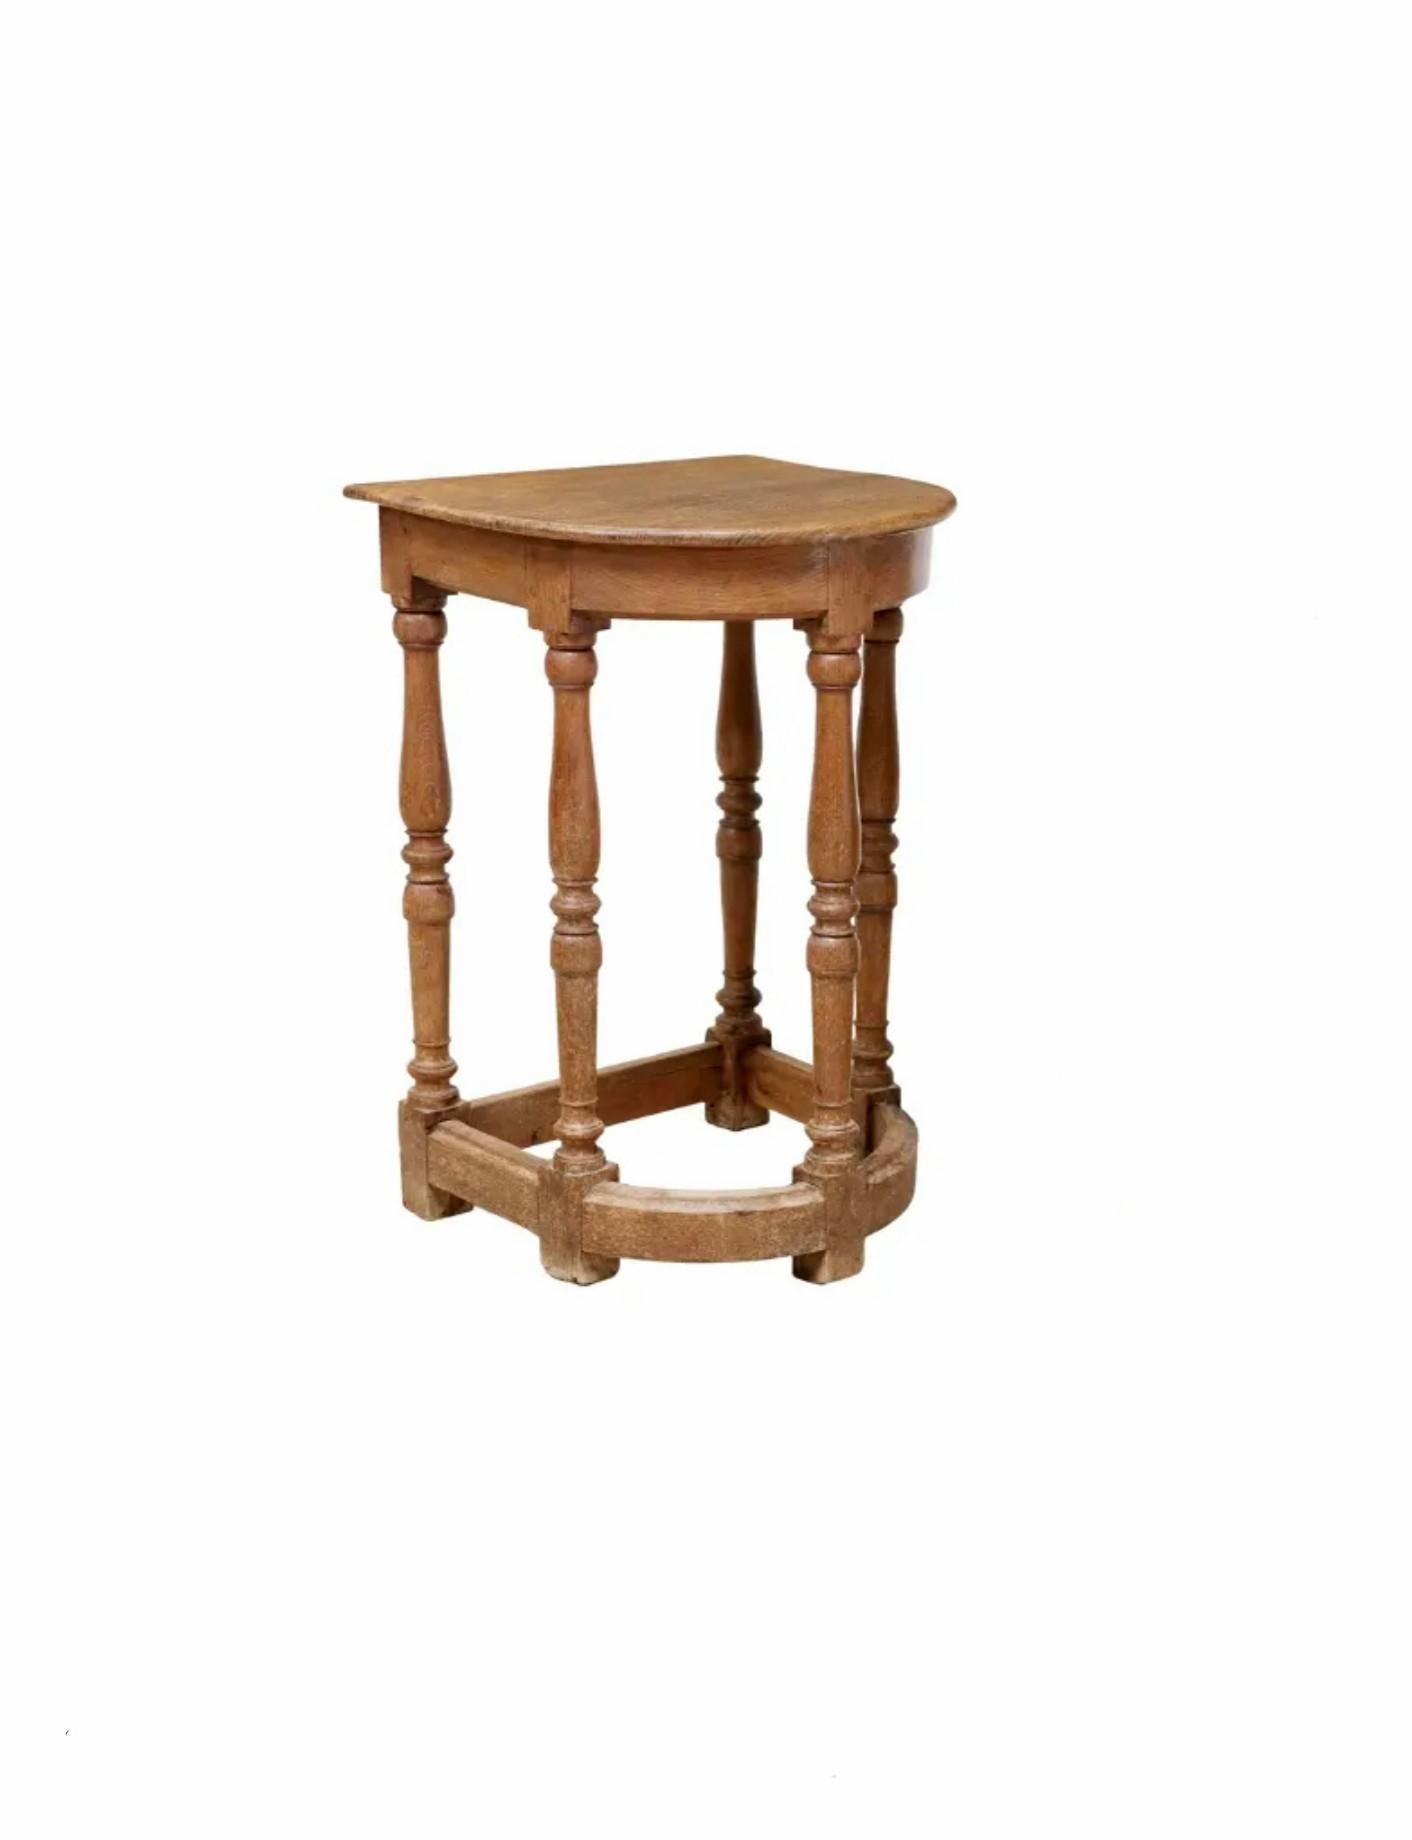 Joinery Rustic 18th/19th Century Country Continental Oak Side Table For Sale